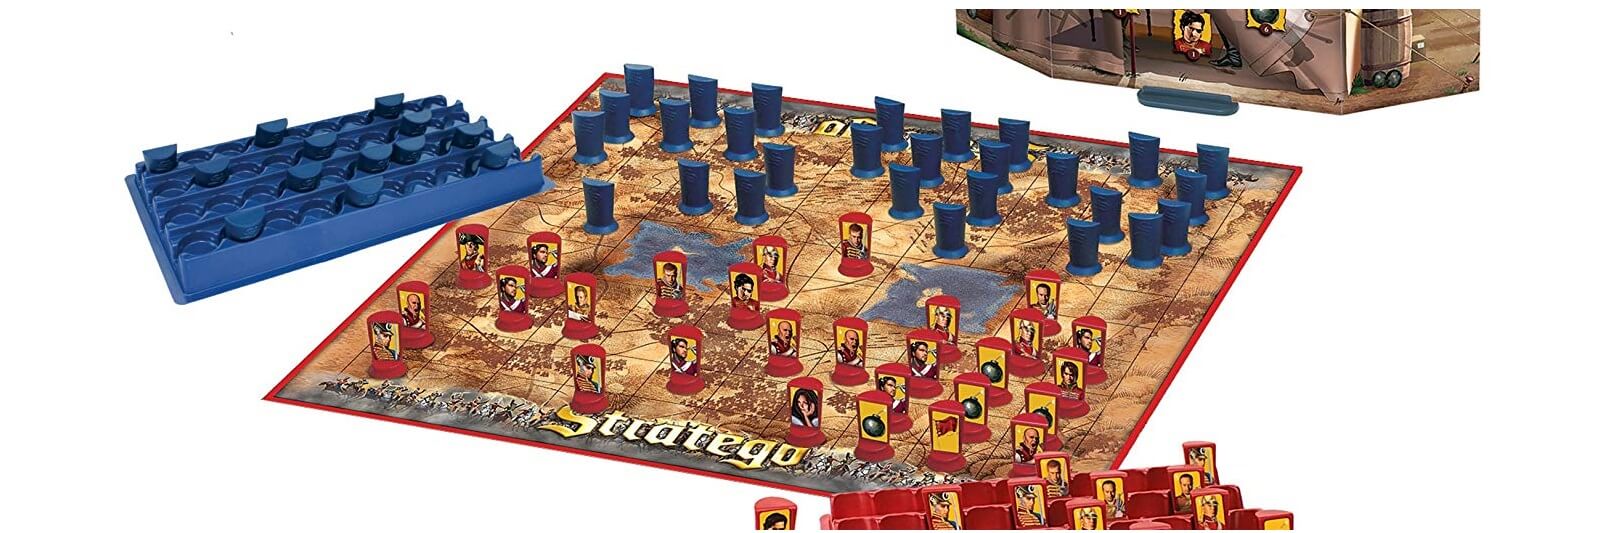 stratego game strategy